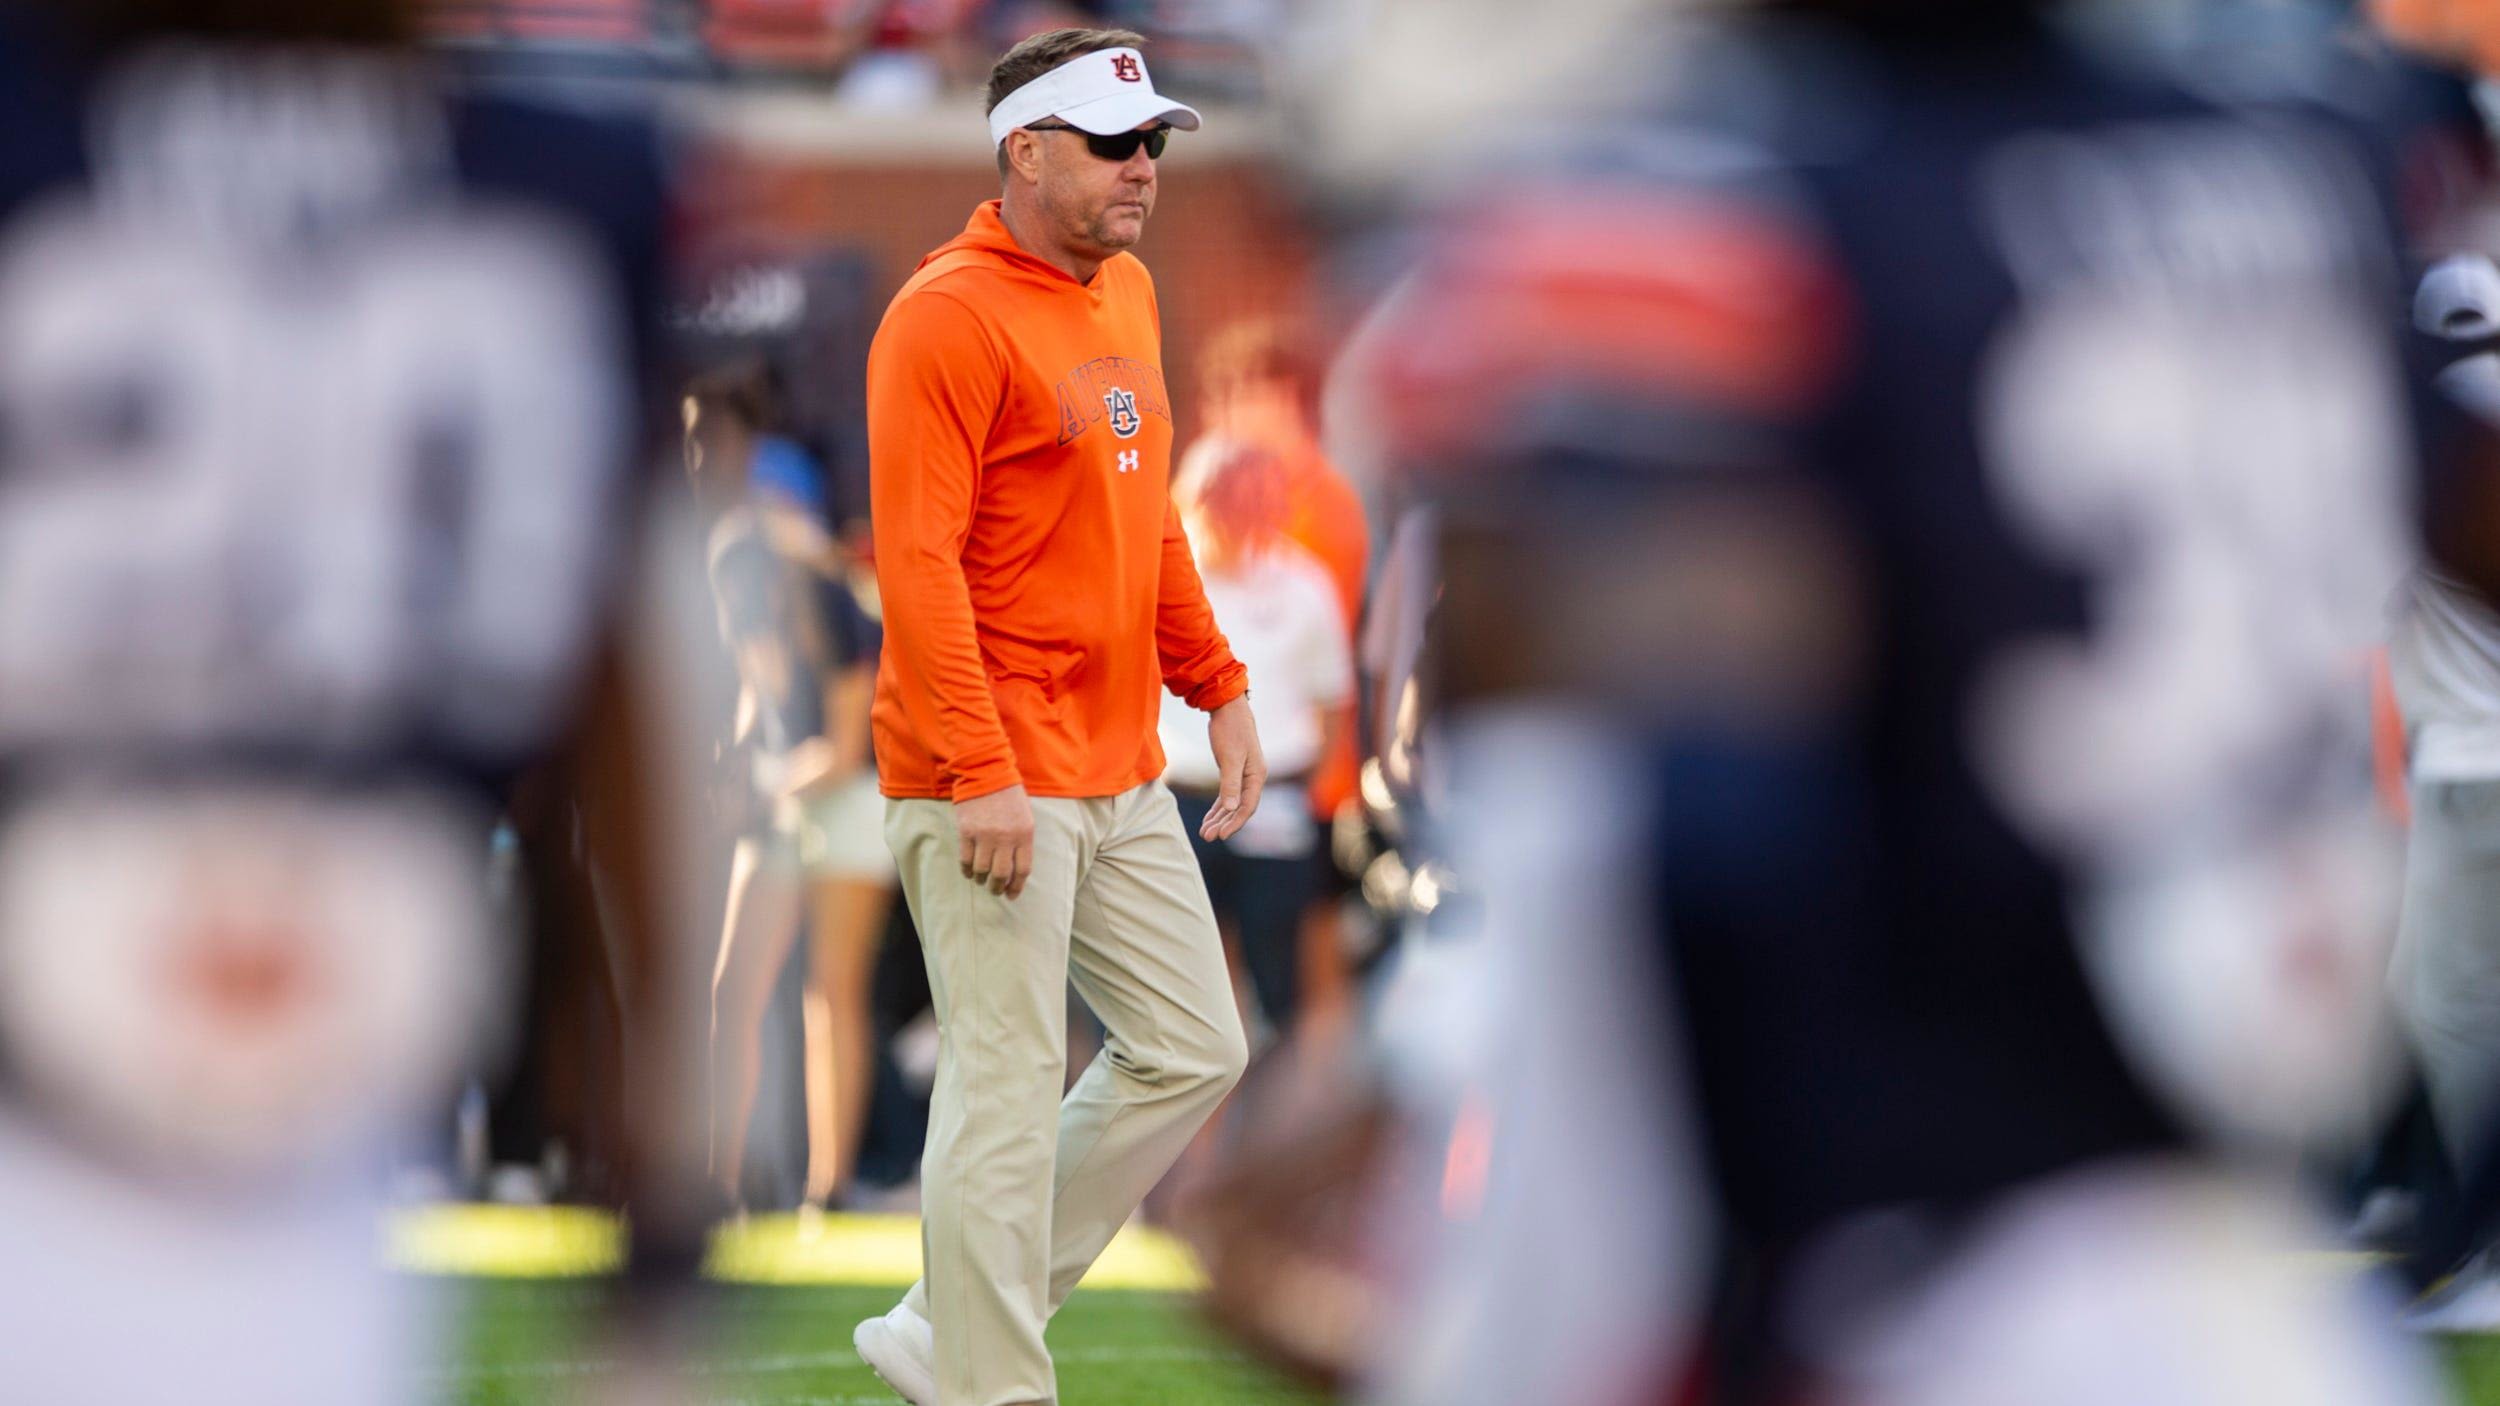 National Analyst on Auburn: 'They are acting how they want to be viewed'